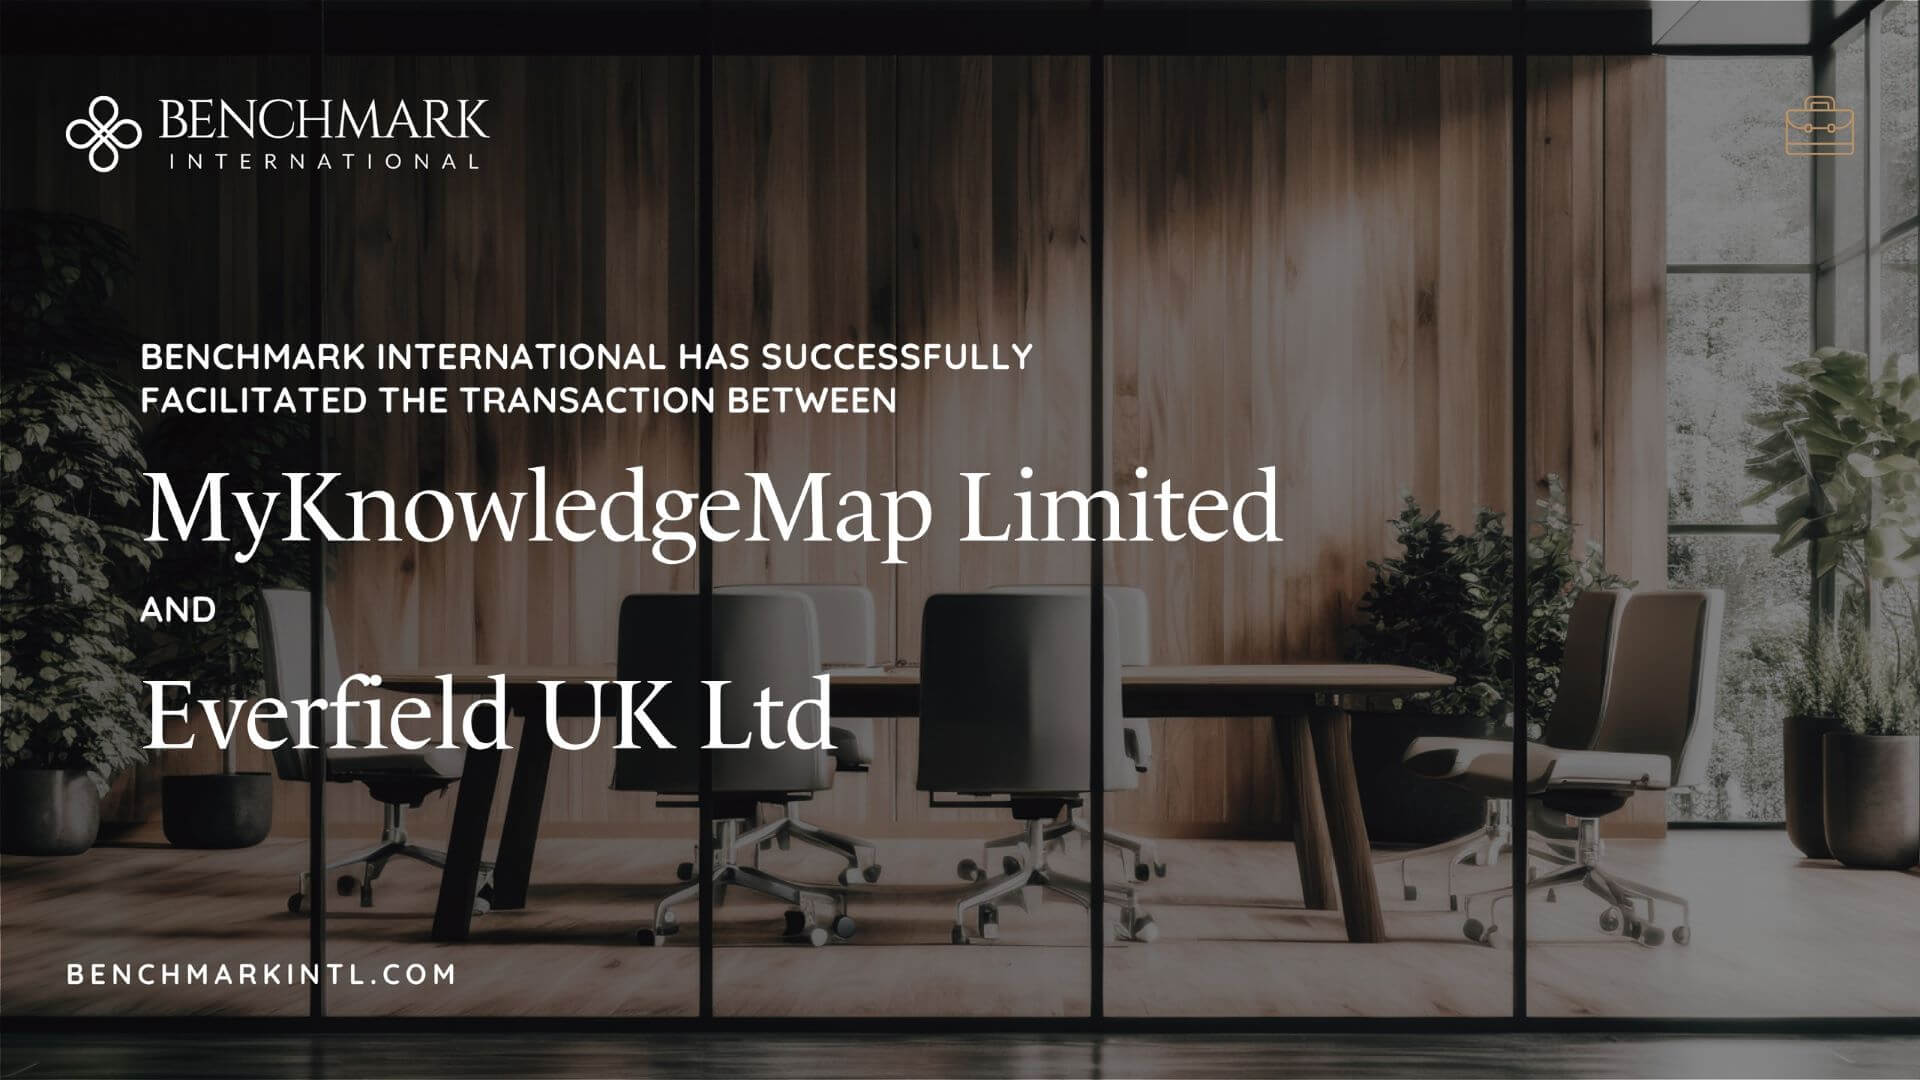 Benchmark International Successfully Facilitated the Transaction Between MyKnowledgeMap Limited and Everfield UK Ltd